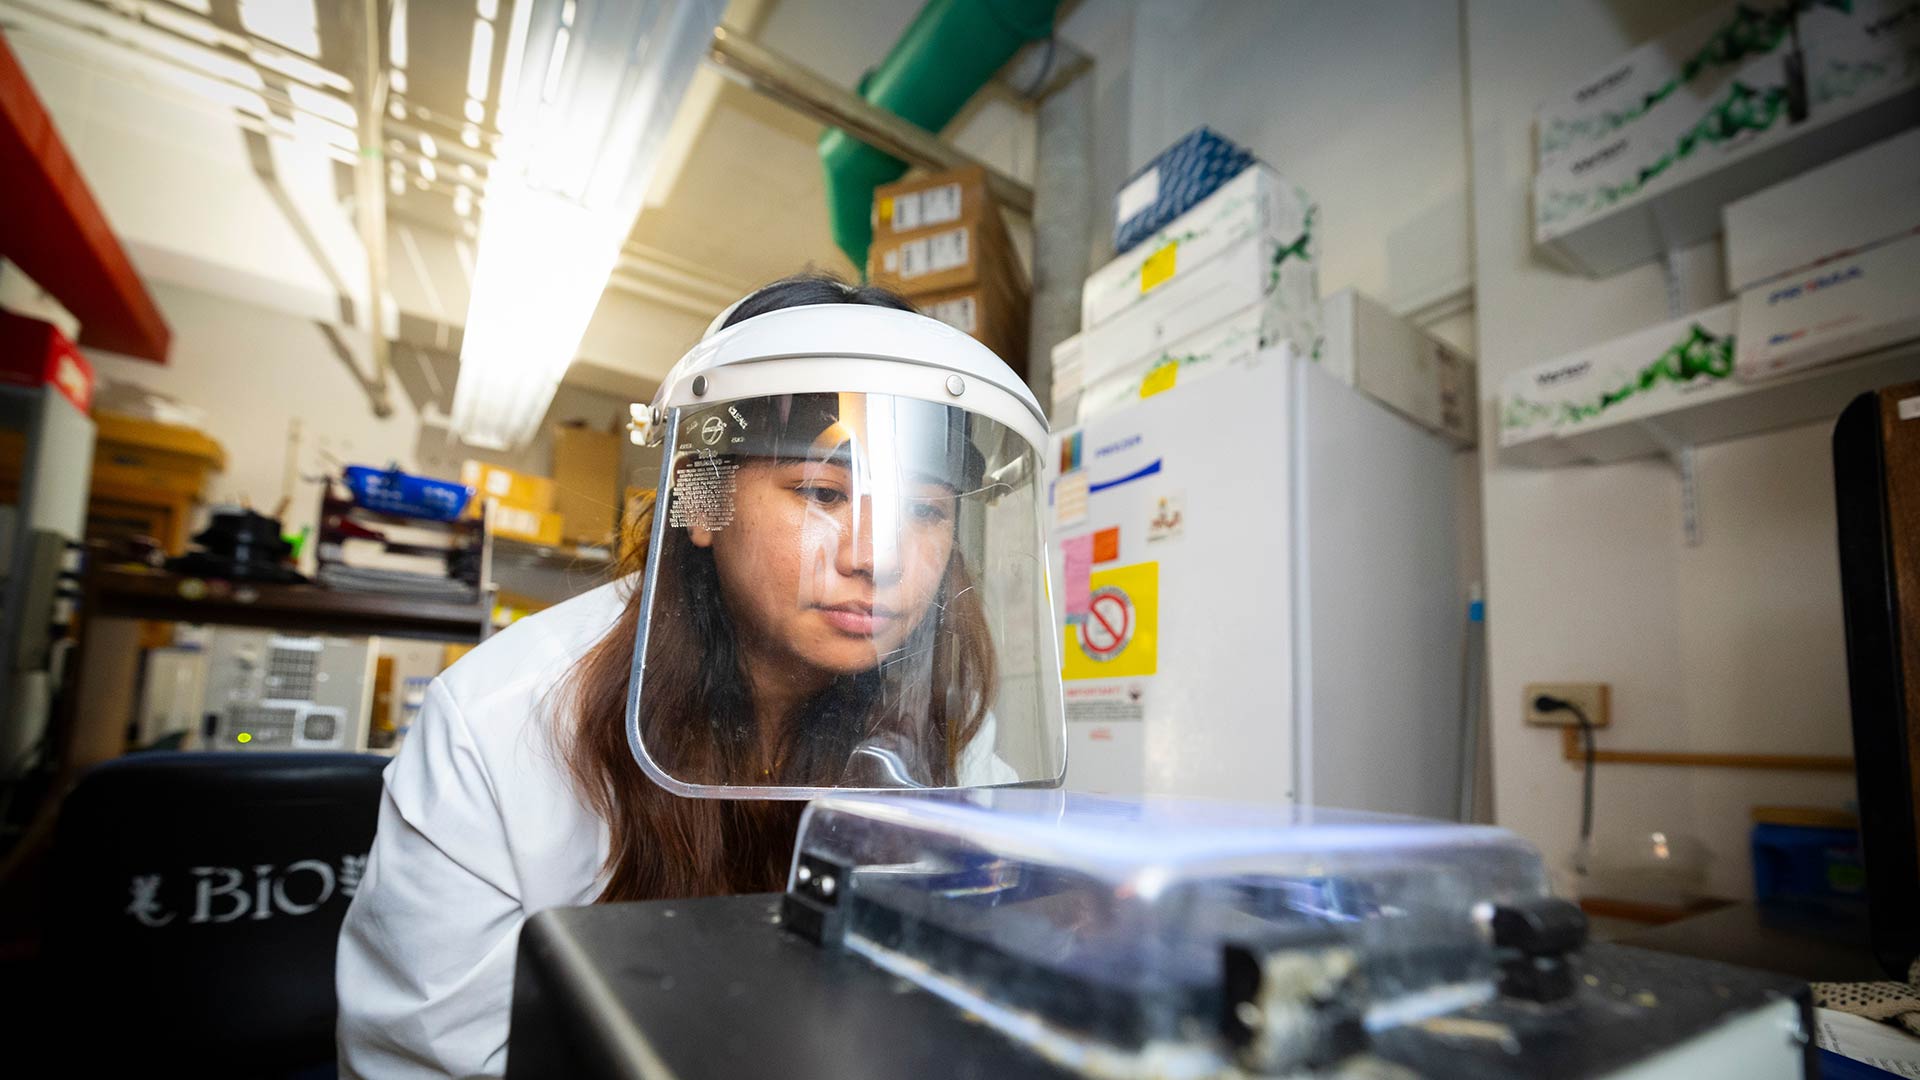 A biology graduate student wearing a plastic face shield takes a close look at a substance in a container.